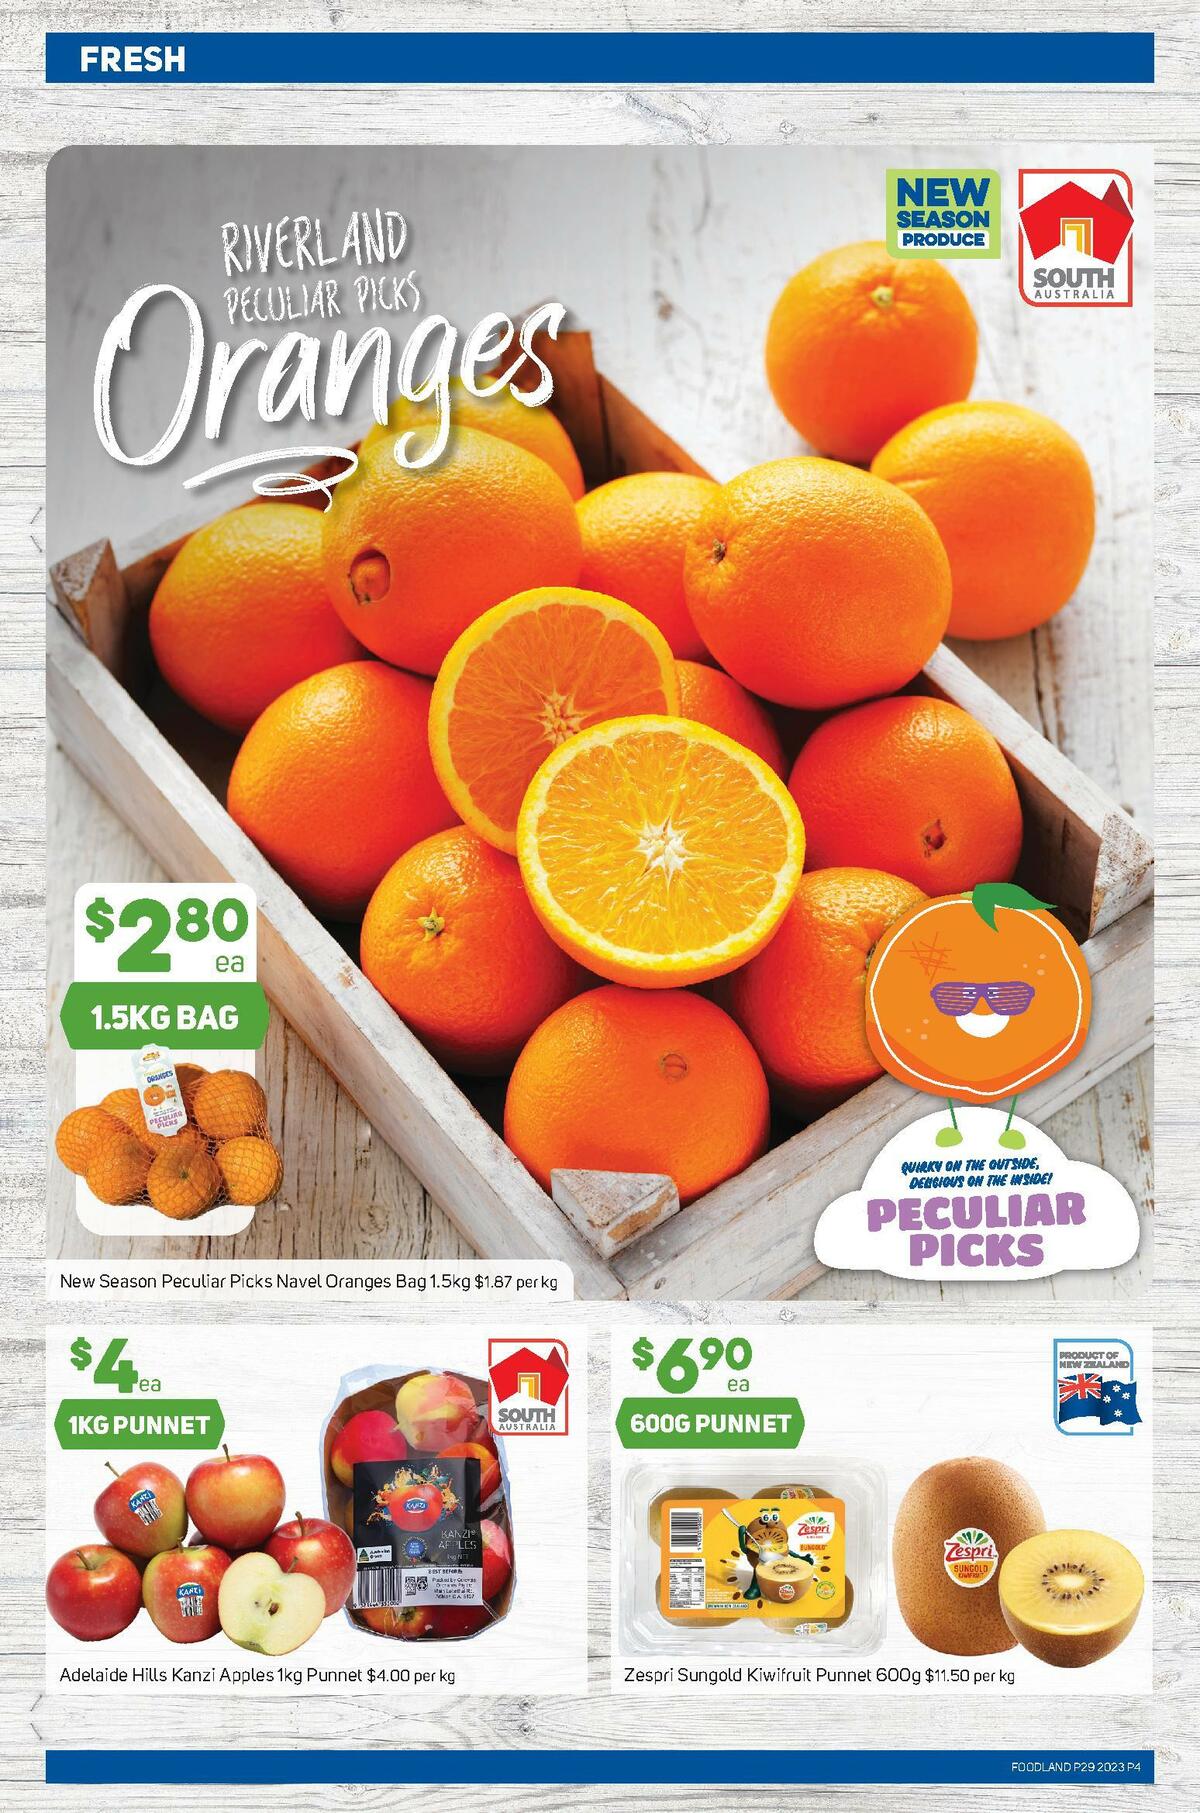 Foodland Catalogues from 19 July